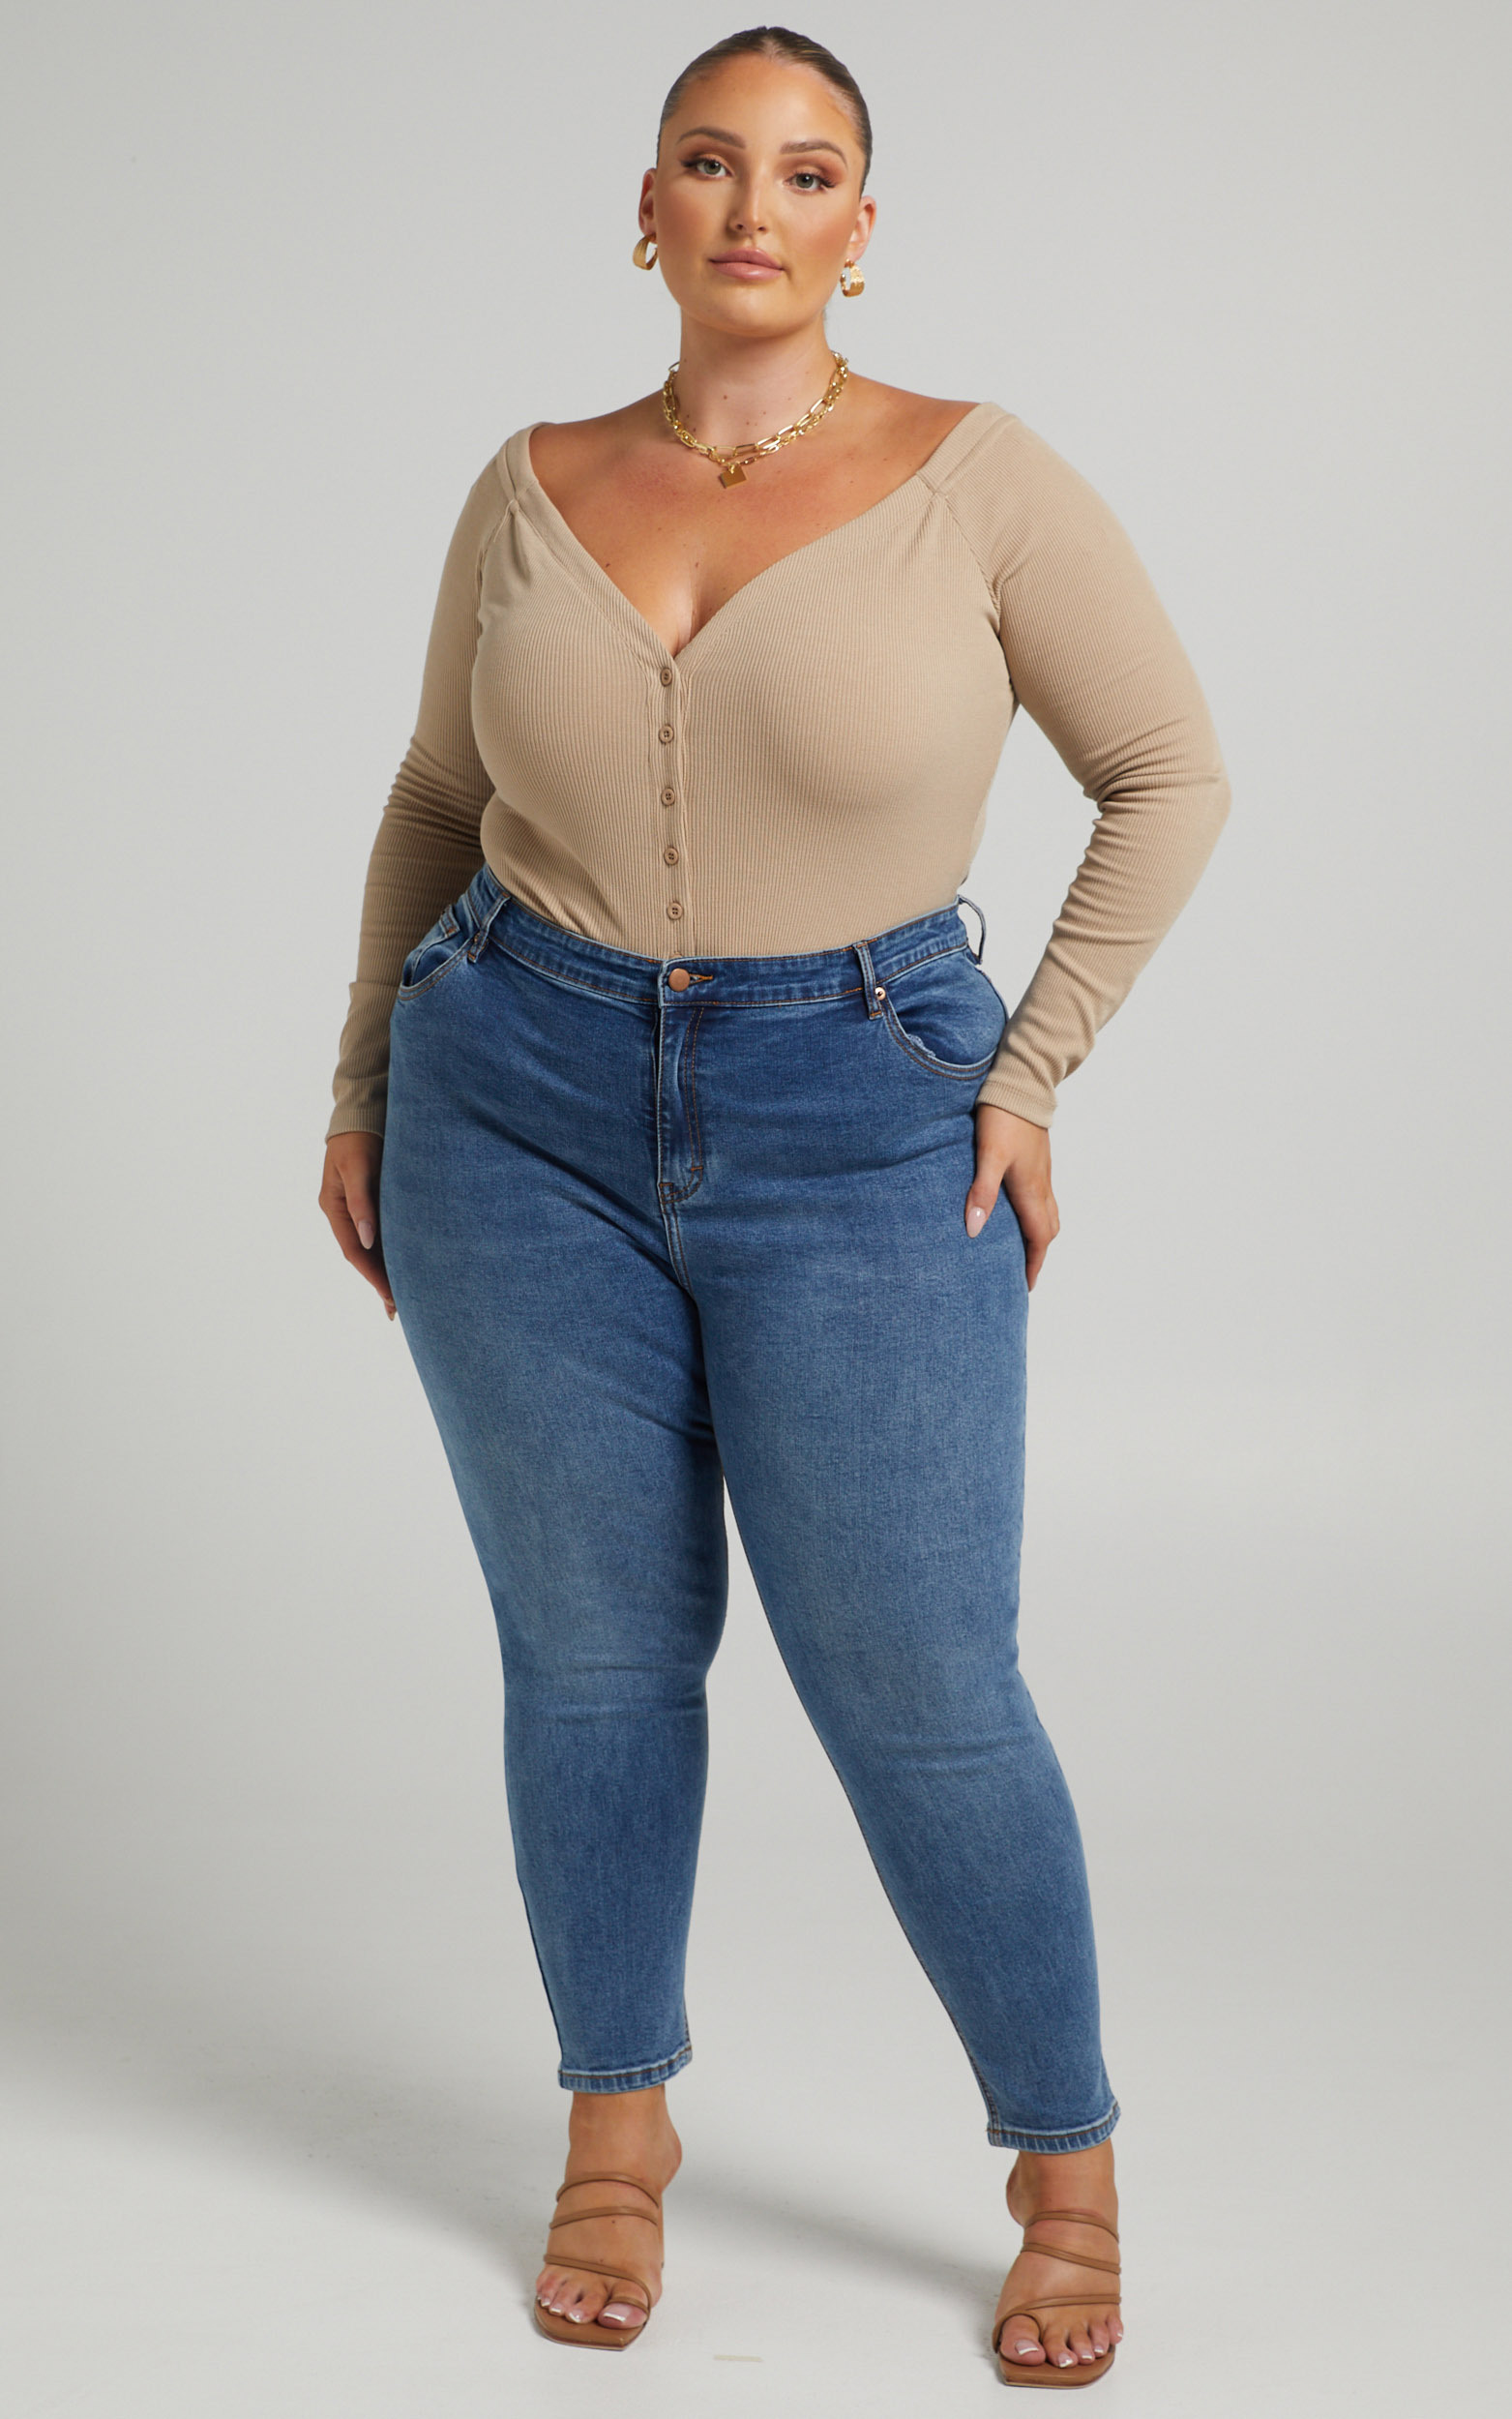 Lucilla Contour fitted Jeans in Blue - 04, BLU1, hi-res image number null